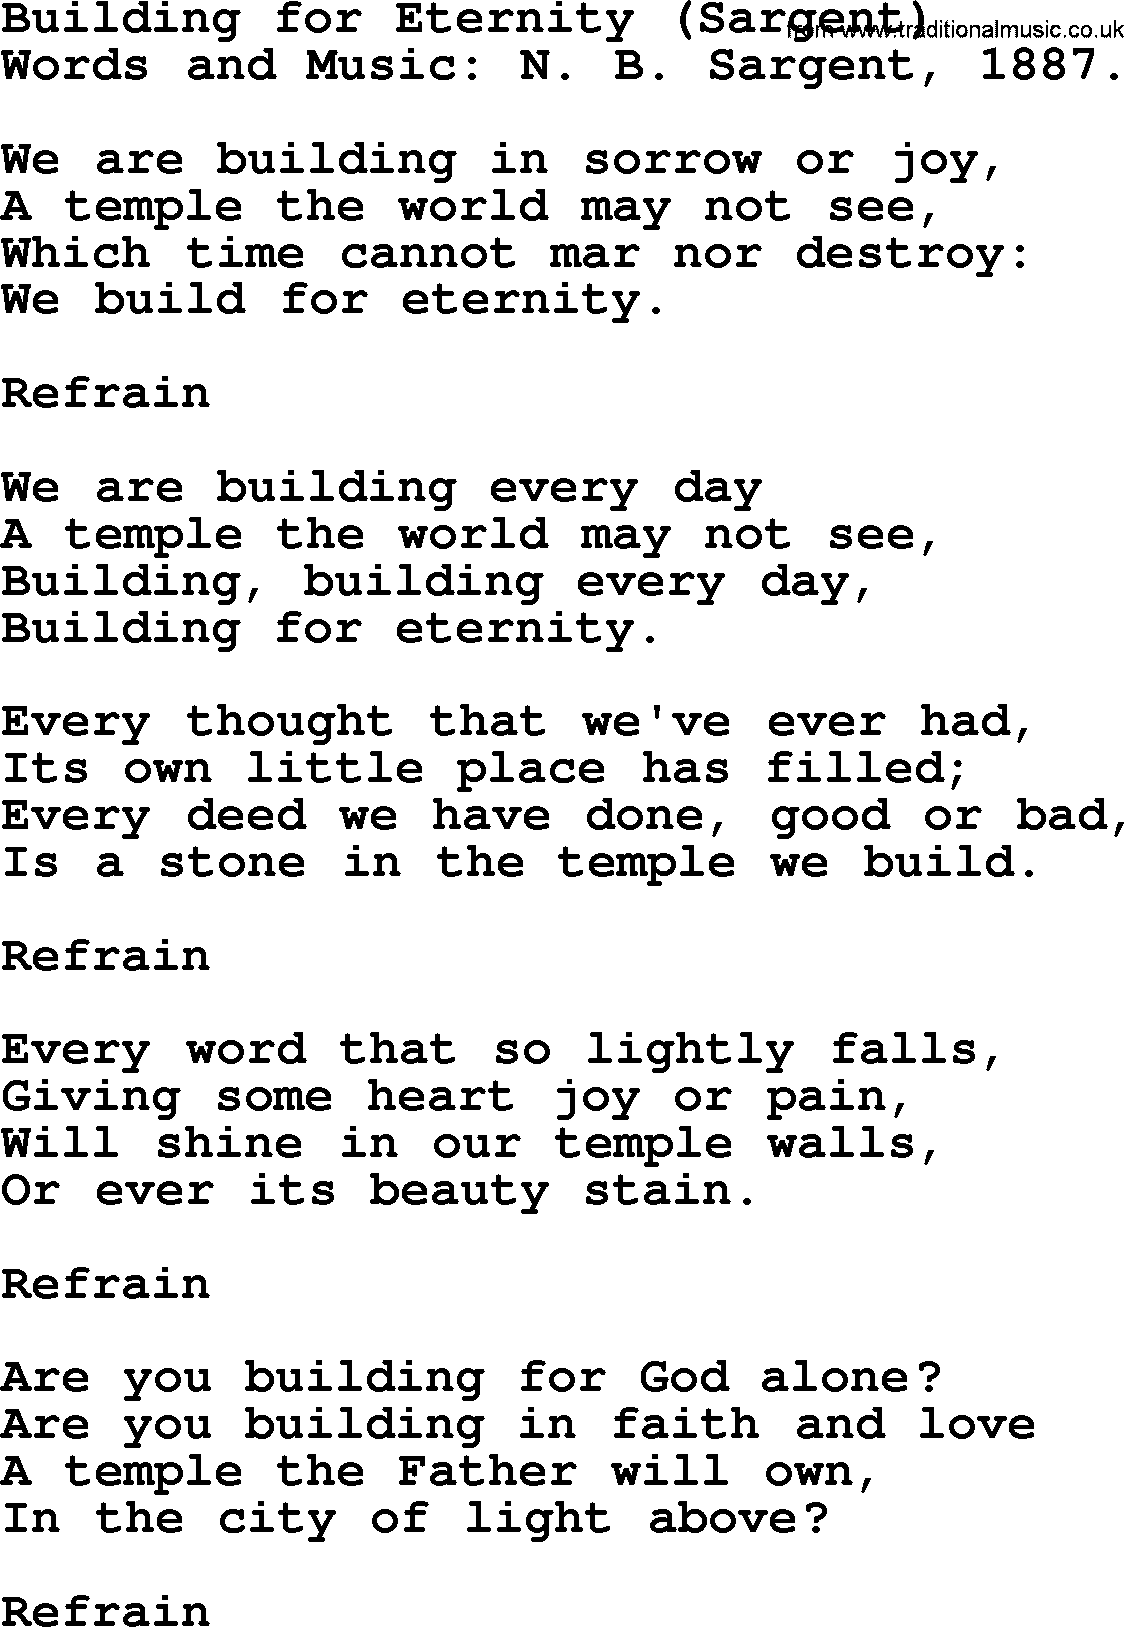 Songs and Hymns about Heaven: Building For Eternity (sargent) lyrics with PDF